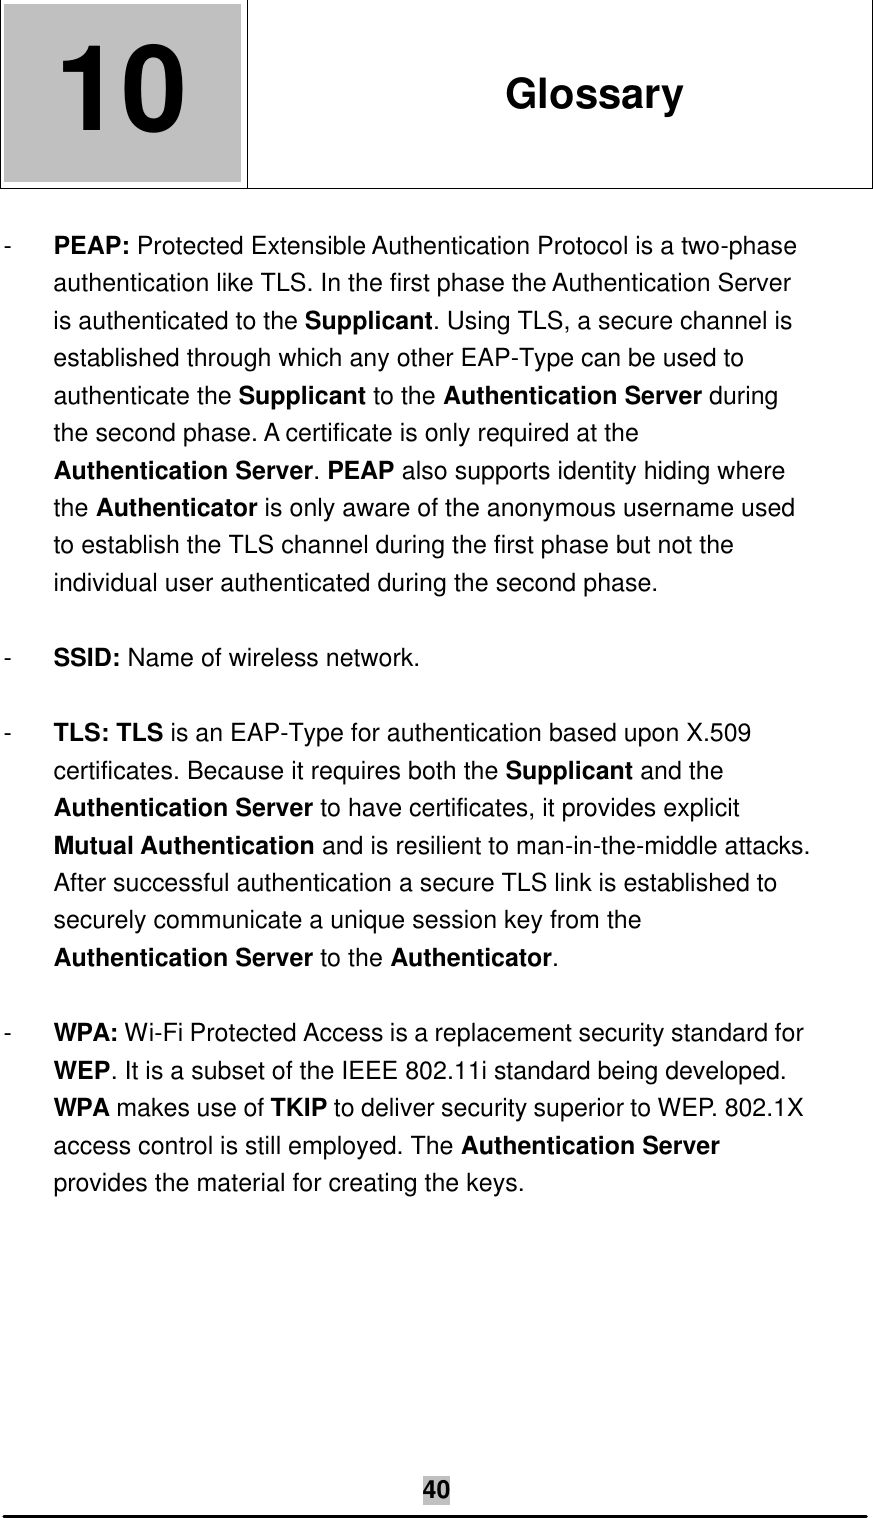   40 10  10. Glossary  - PEAP: Protected Extensible Authentication Protocol is a two-phase authentication like TLS. In the first phase the Authentication Server is authenticated to the Supplicant. Using TLS, a secure channel is established through which any other EAP-Type can be used to authenticate the Supplicant to the Authentication Server during the second phase. A certificate is only required at the Authentication Server. PEAP also supports identity hiding where the Authenticator is only aware of the anonymous username used to establish the TLS channel during the first phase but not the individual user authenticated during the second phase.  - SSID: Name of wireless network.  - TLS: TLS is an EAP-Type for authentication based upon X.509 certificates. Because it requires both the Supplicant and the Authentication Server to have certificates, it provides explicit Mutual Authentication and is resilient to man-in-the-middle attacks. After successful authentication a secure TLS link is established to securely communicate a unique session key from the Authentication Server to the Authenticator.  - WPA: Wi-Fi Protected Access is a replacement security standard for WEP. It is a subset of the IEEE 802.11i standard being developed. WPA makes use of TKIP to deliver security superior to WEP. 802.1X access control is still employed. The Authentication Server provides the material for creating the keys.  